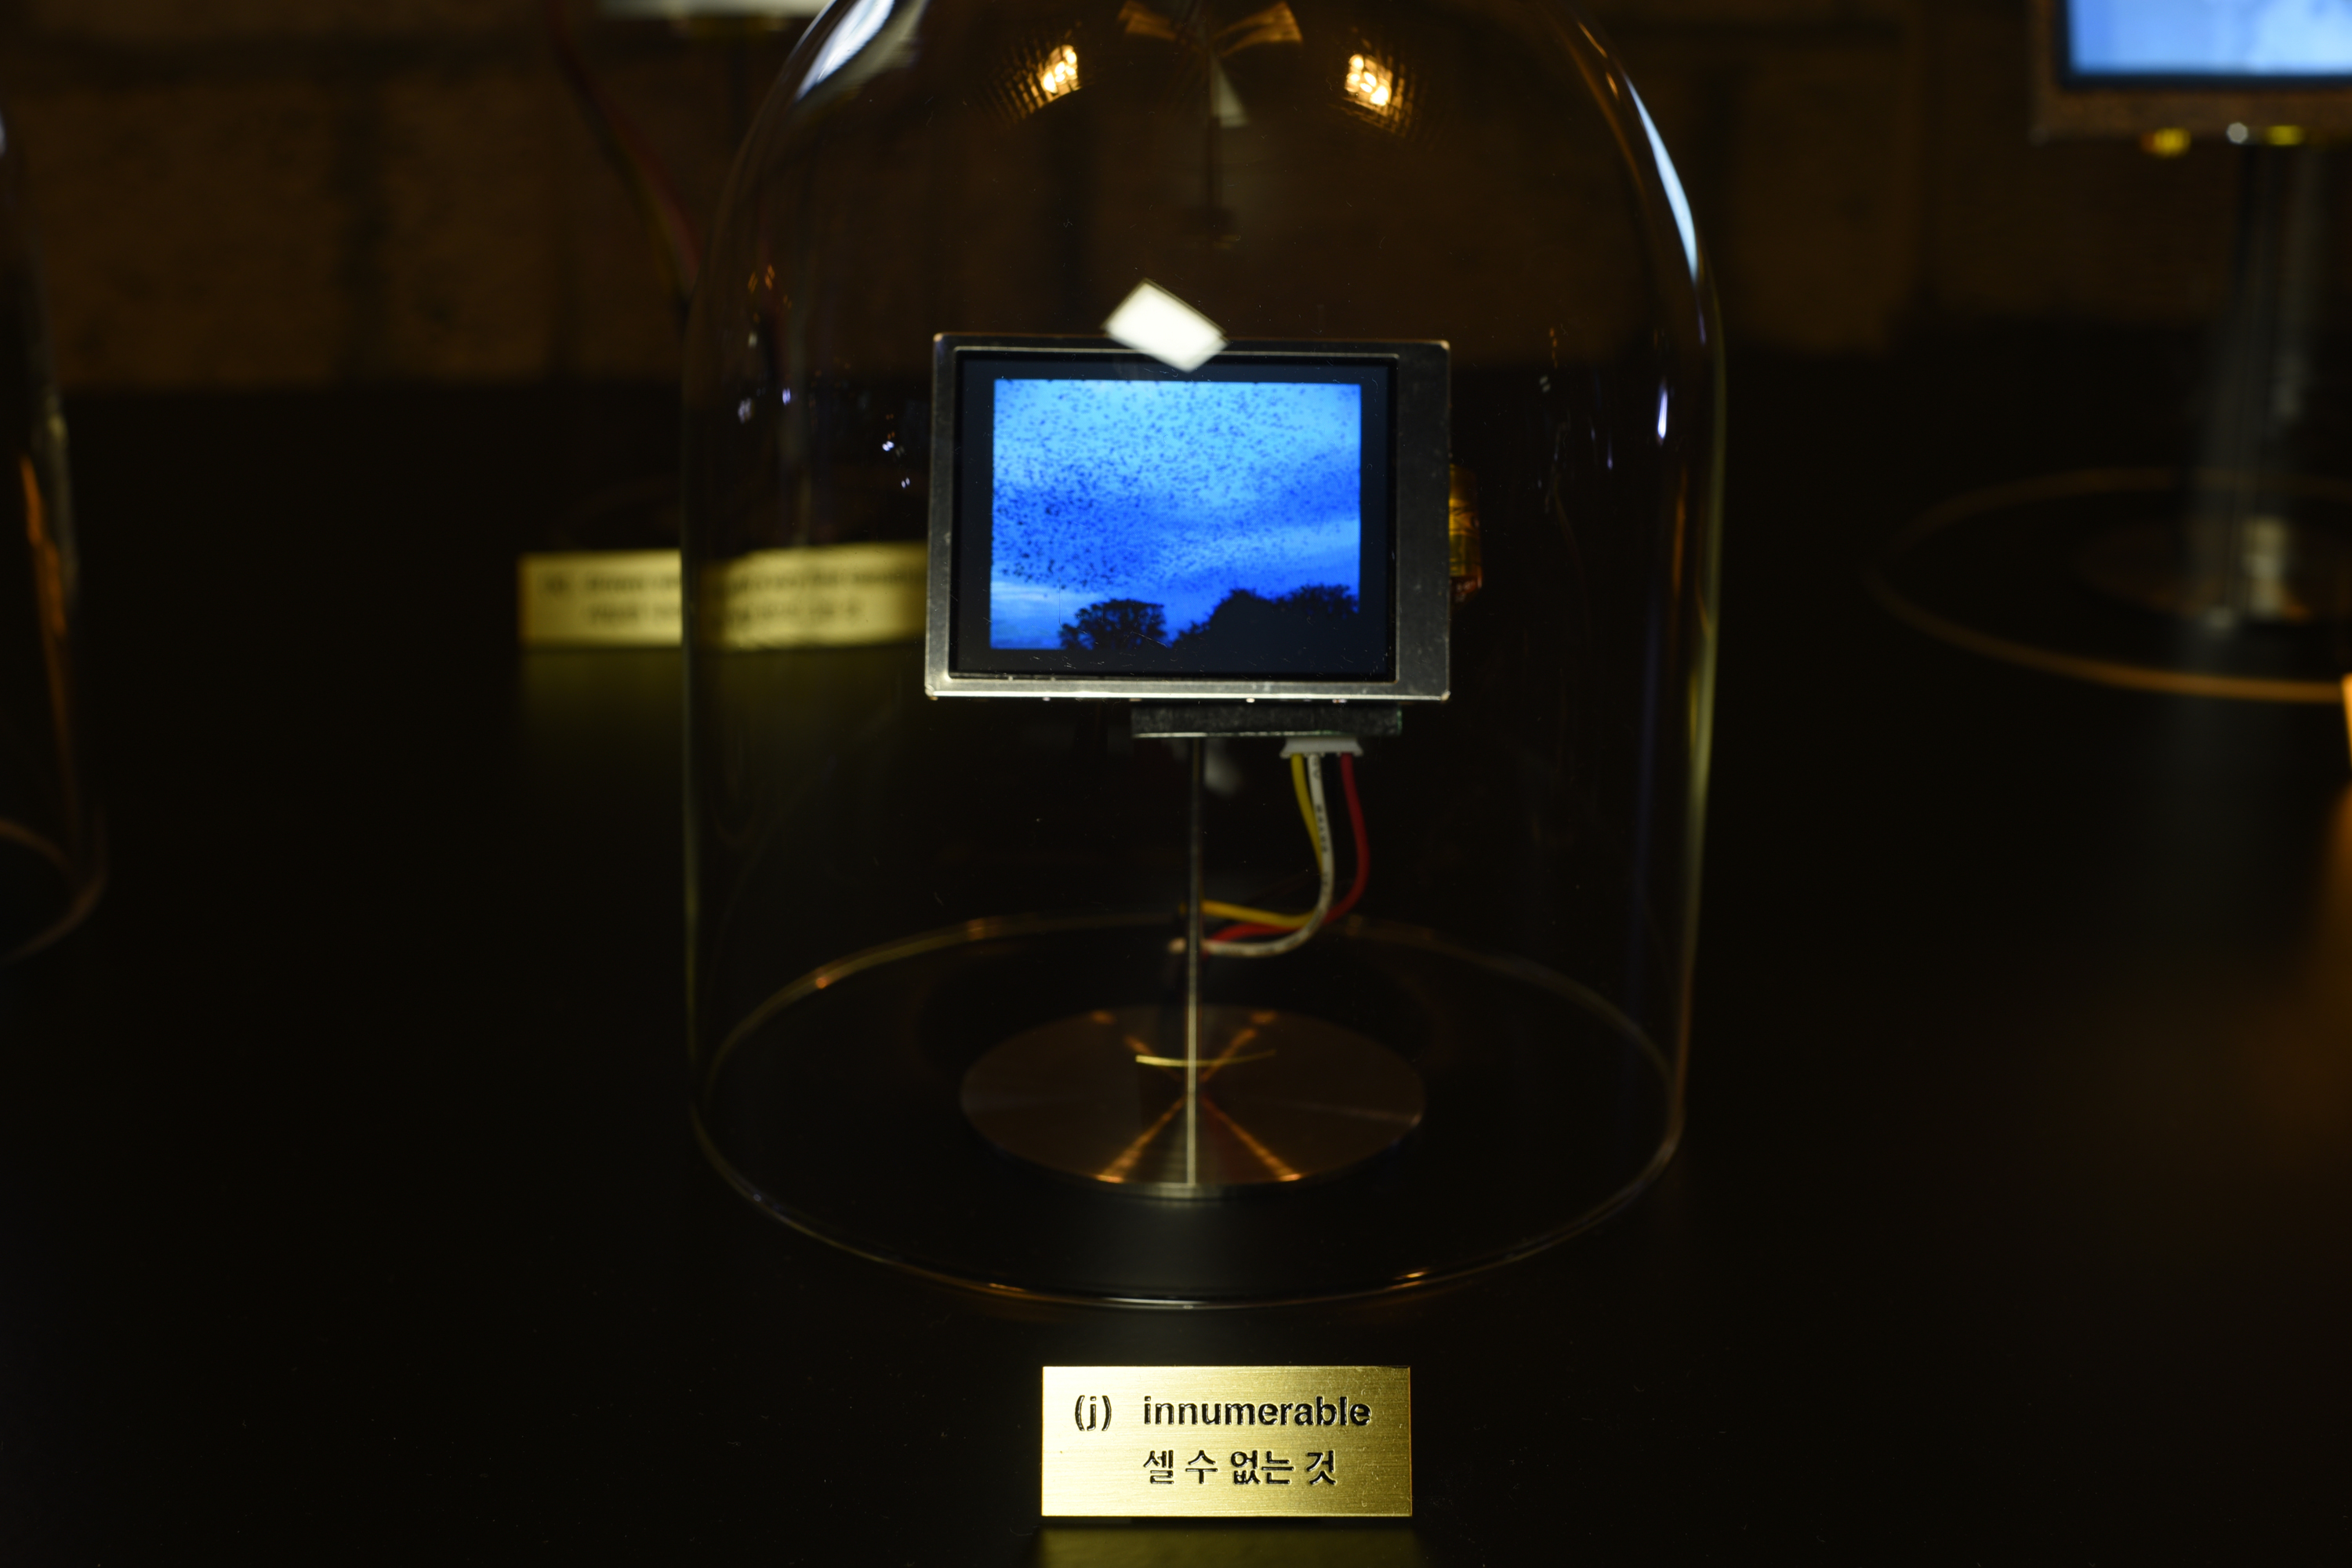 The photo shows a glass bell with a small screen.